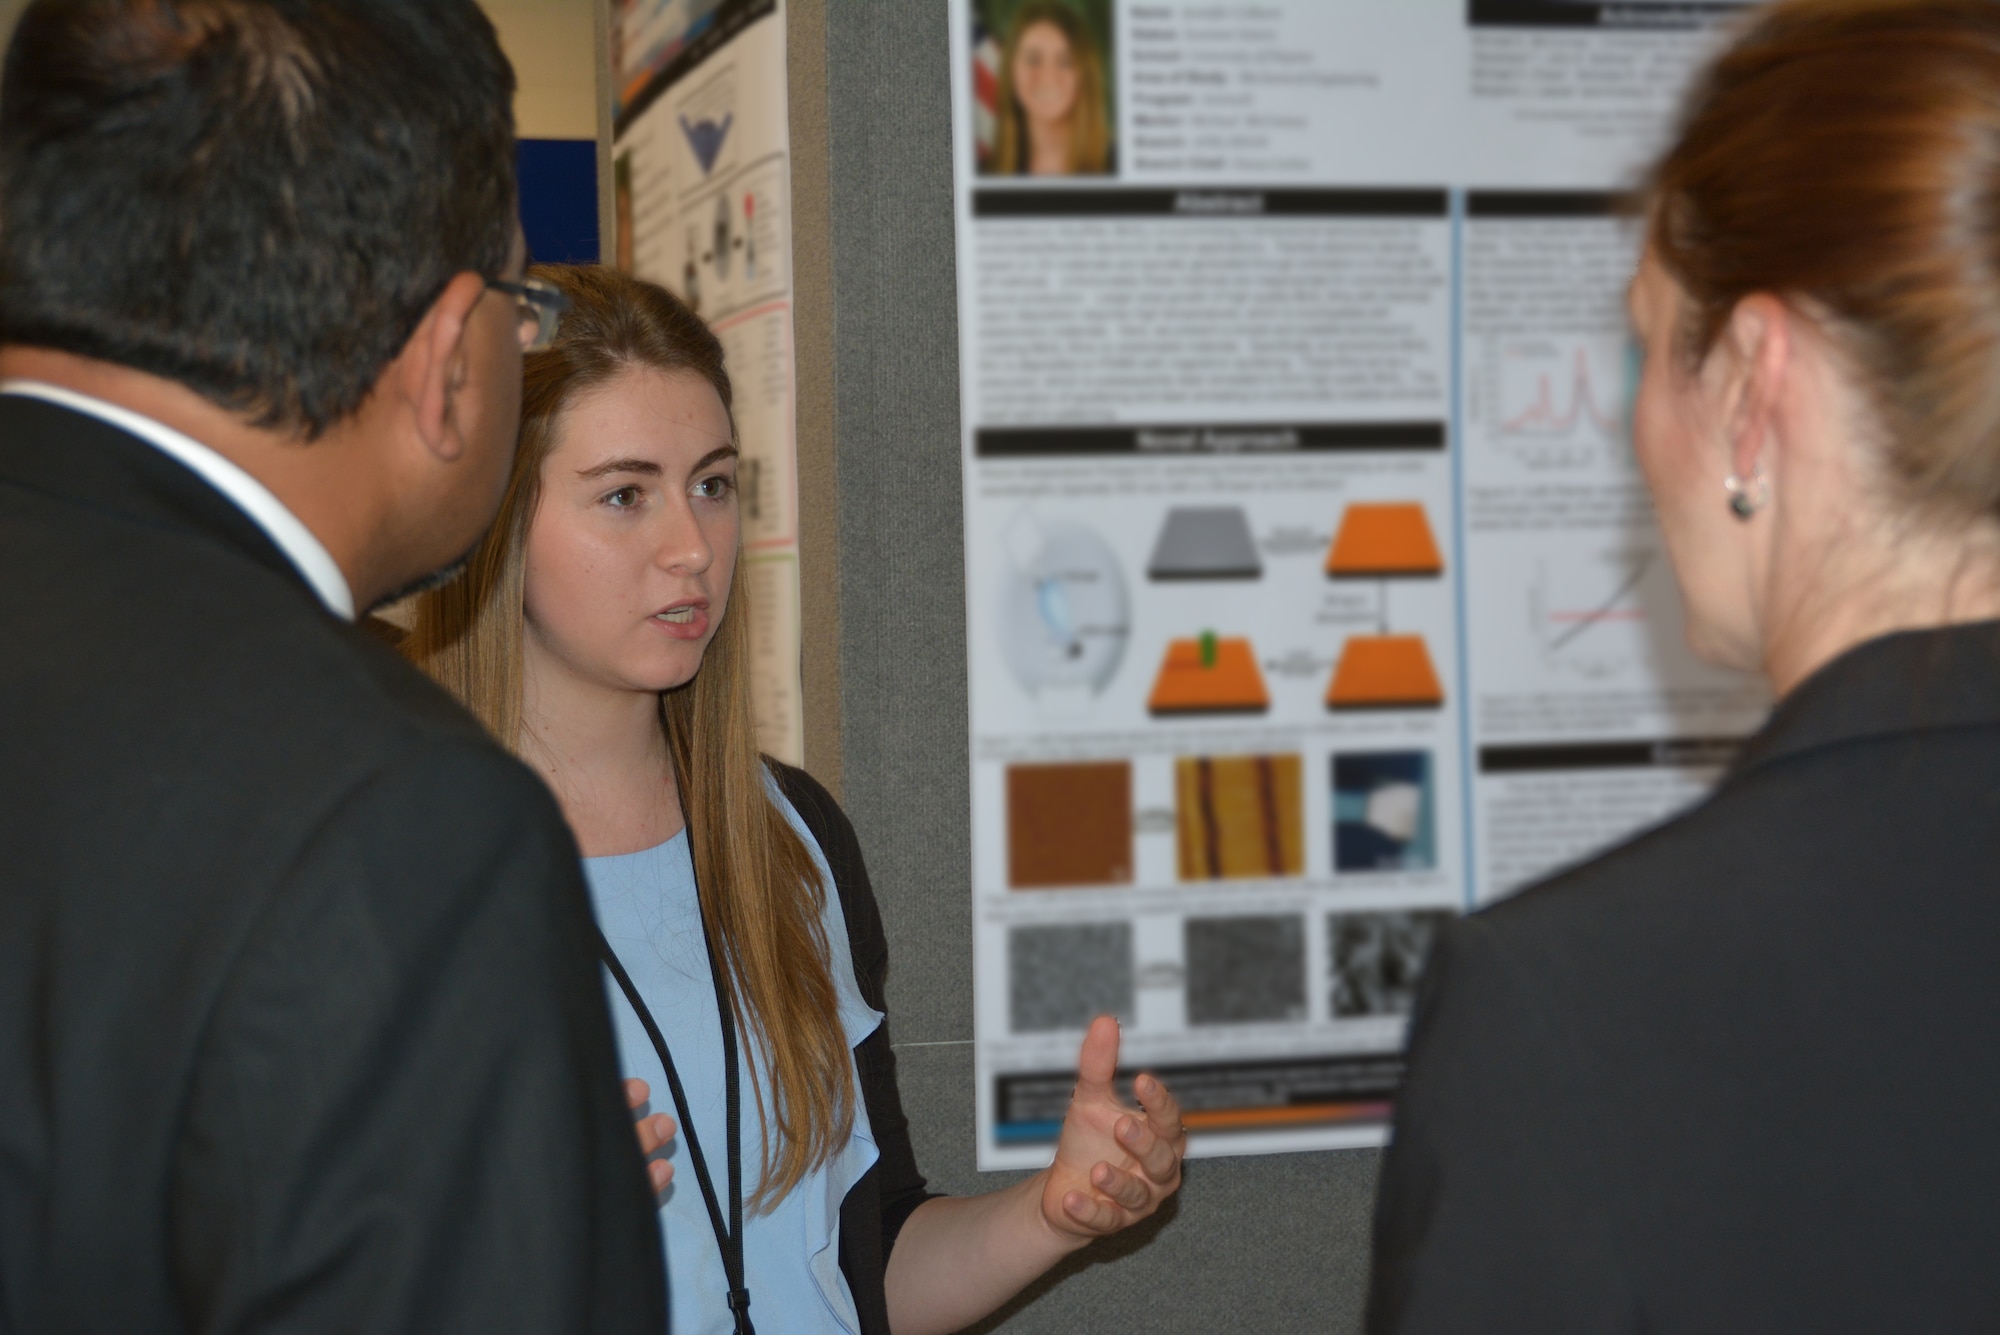 AFRL student researcher Ms. Jennifer Colborn describes her research to members of the Dayton Development Coalition during the August 5 summer student poster session and tour at the AFRL Materials and Manufacturing Directorate.  (AFRL photo by Anise Simpson)